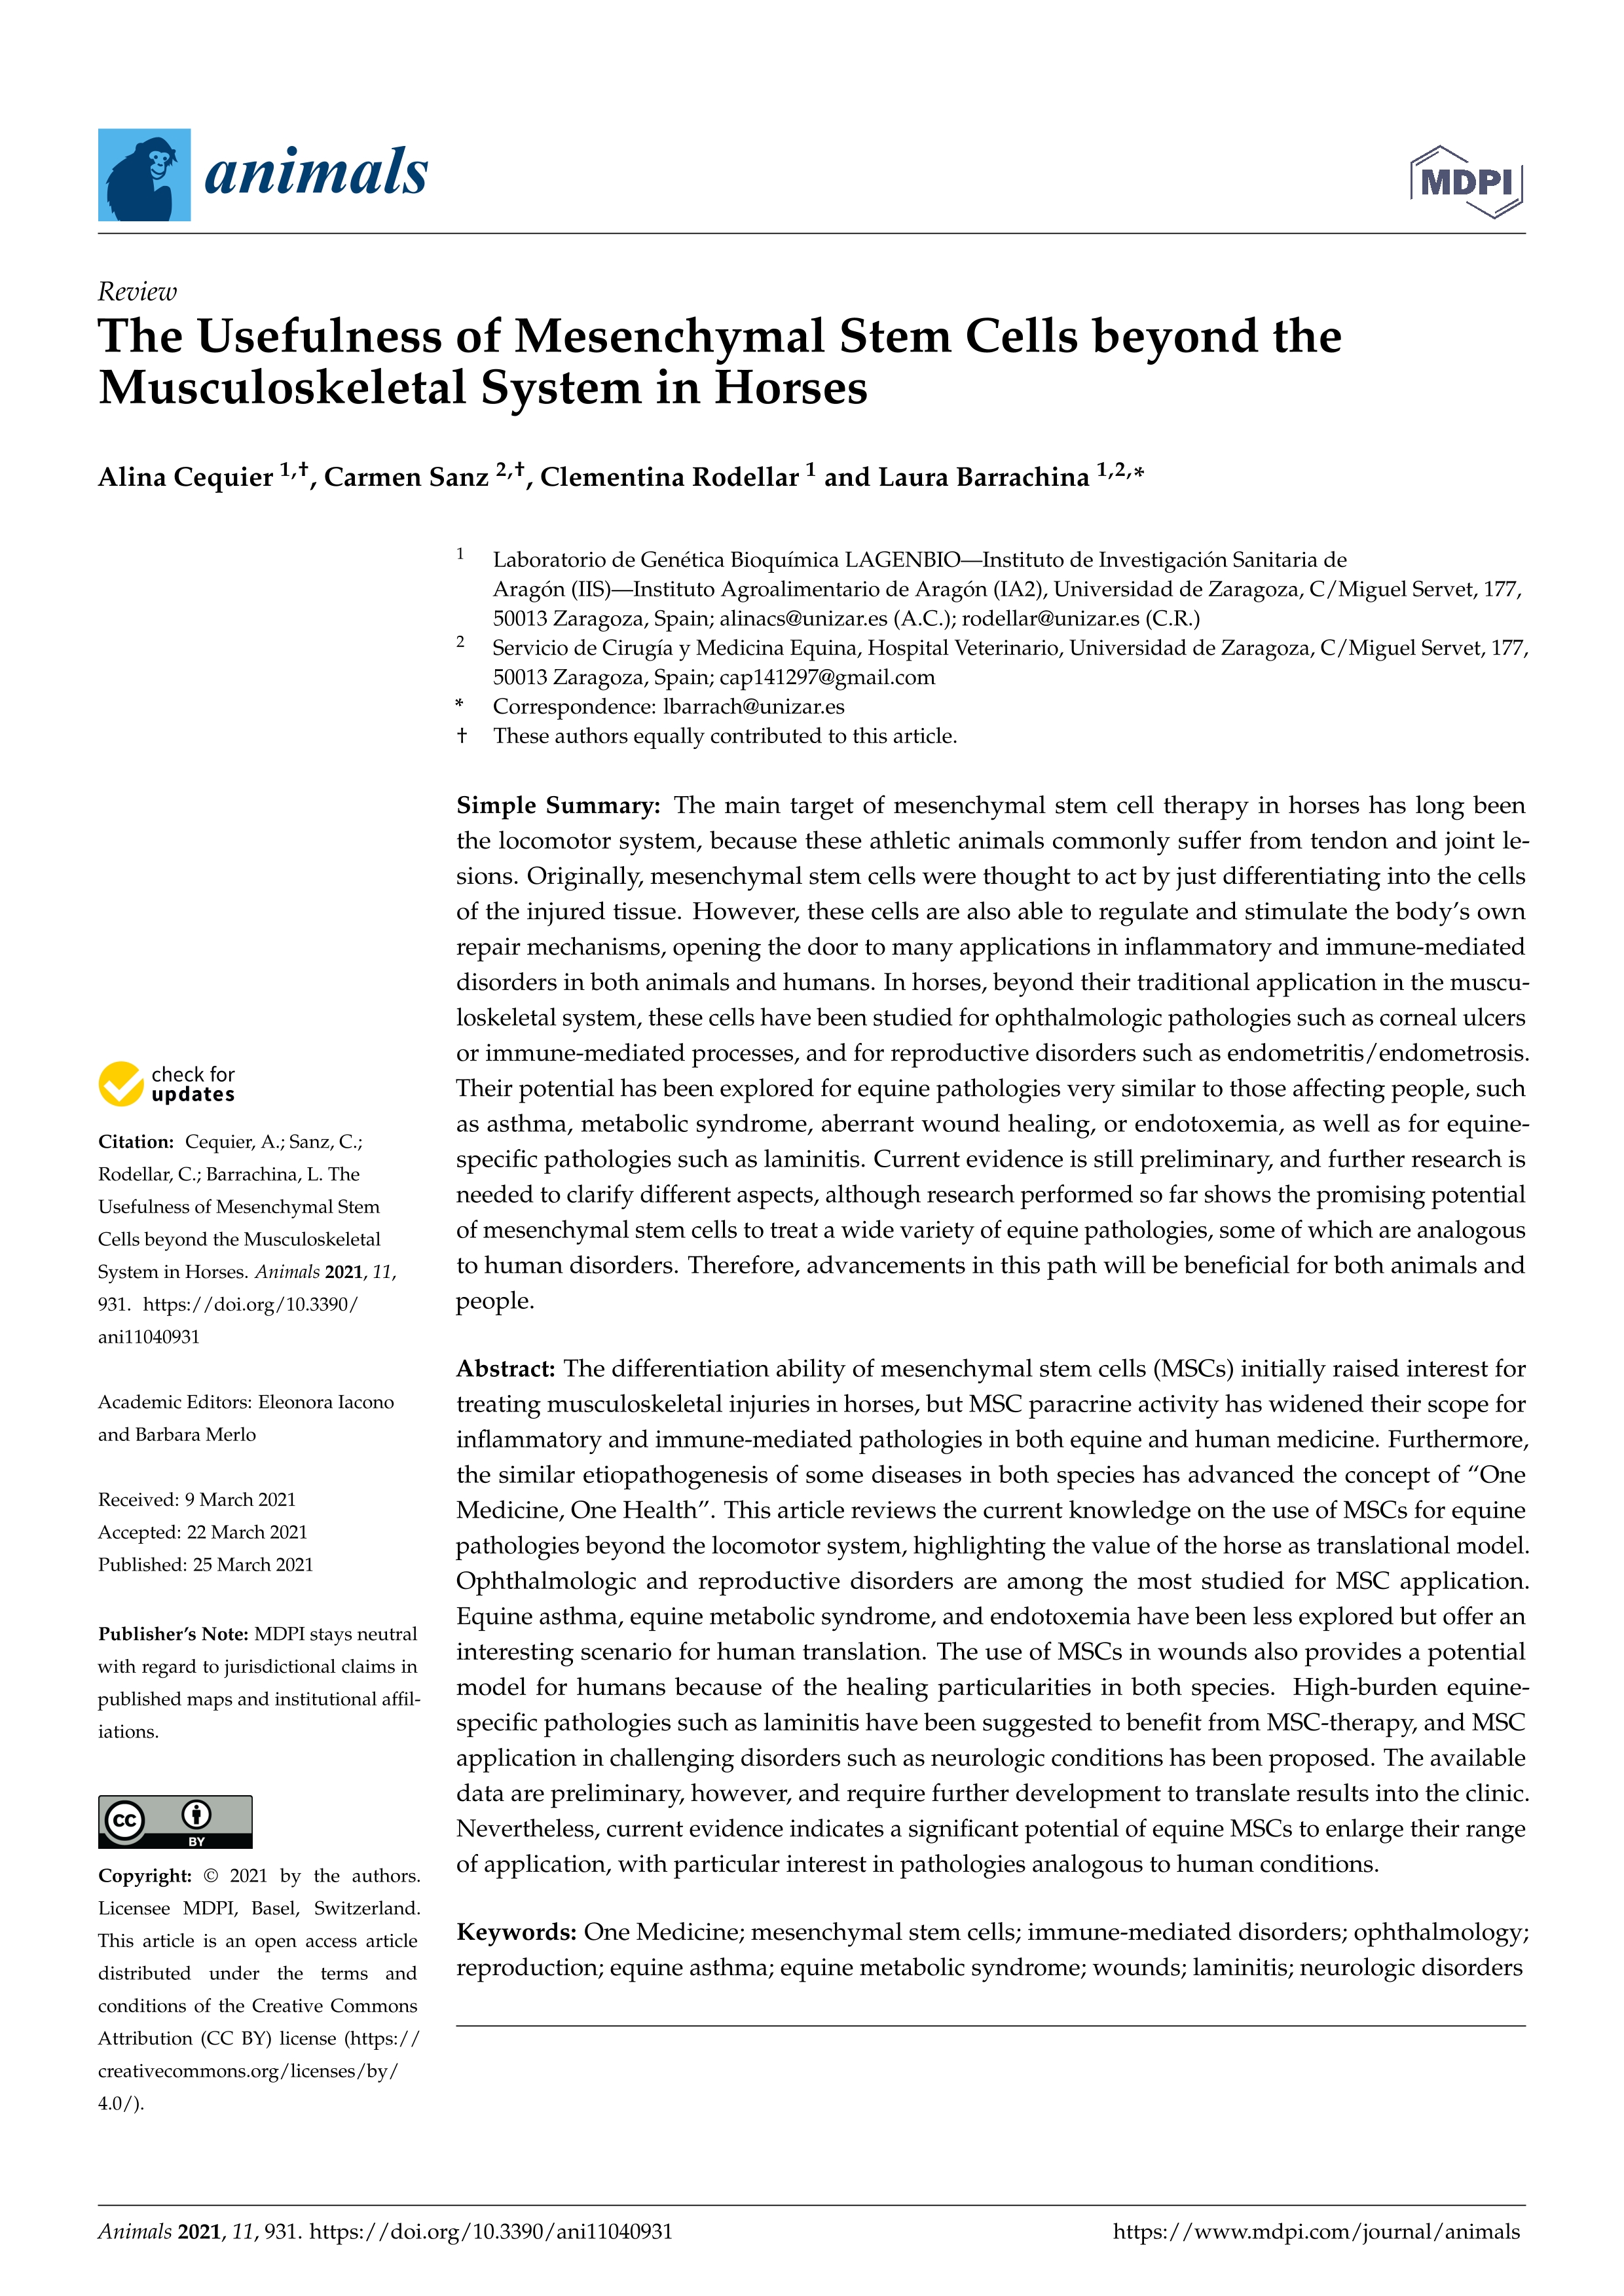 The usefulness of mesenchymal stem cells beyond the musculoskeletal system in horses